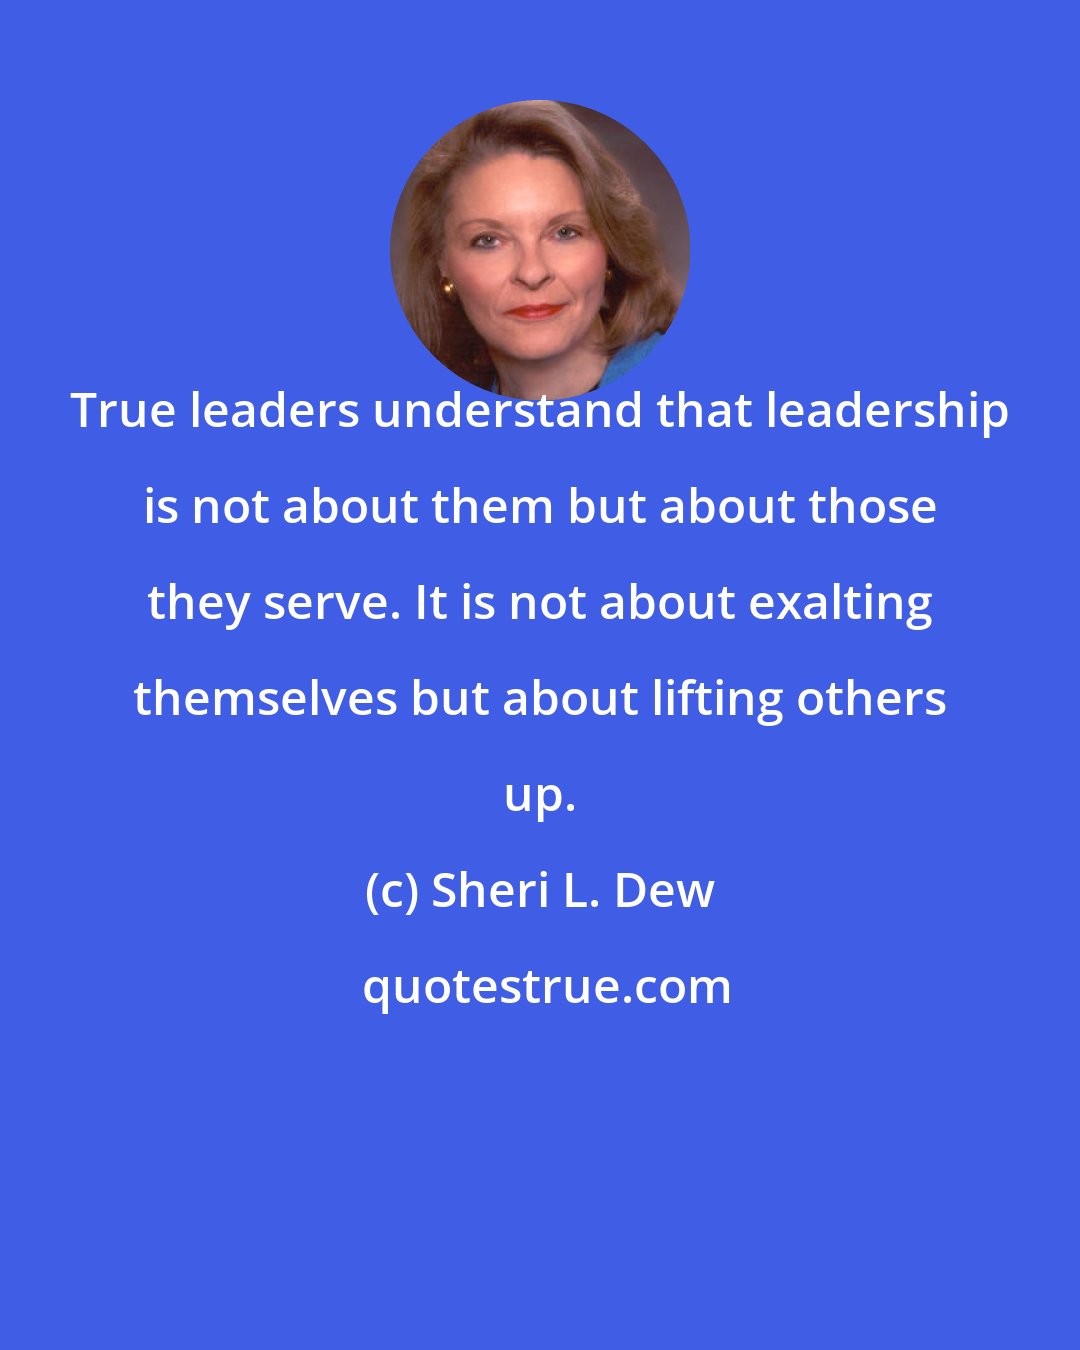 Sheri L. Dew: True leaders understand that leadership is not about them but about those they serve. It is not about exalting themselves but about lifting others up.